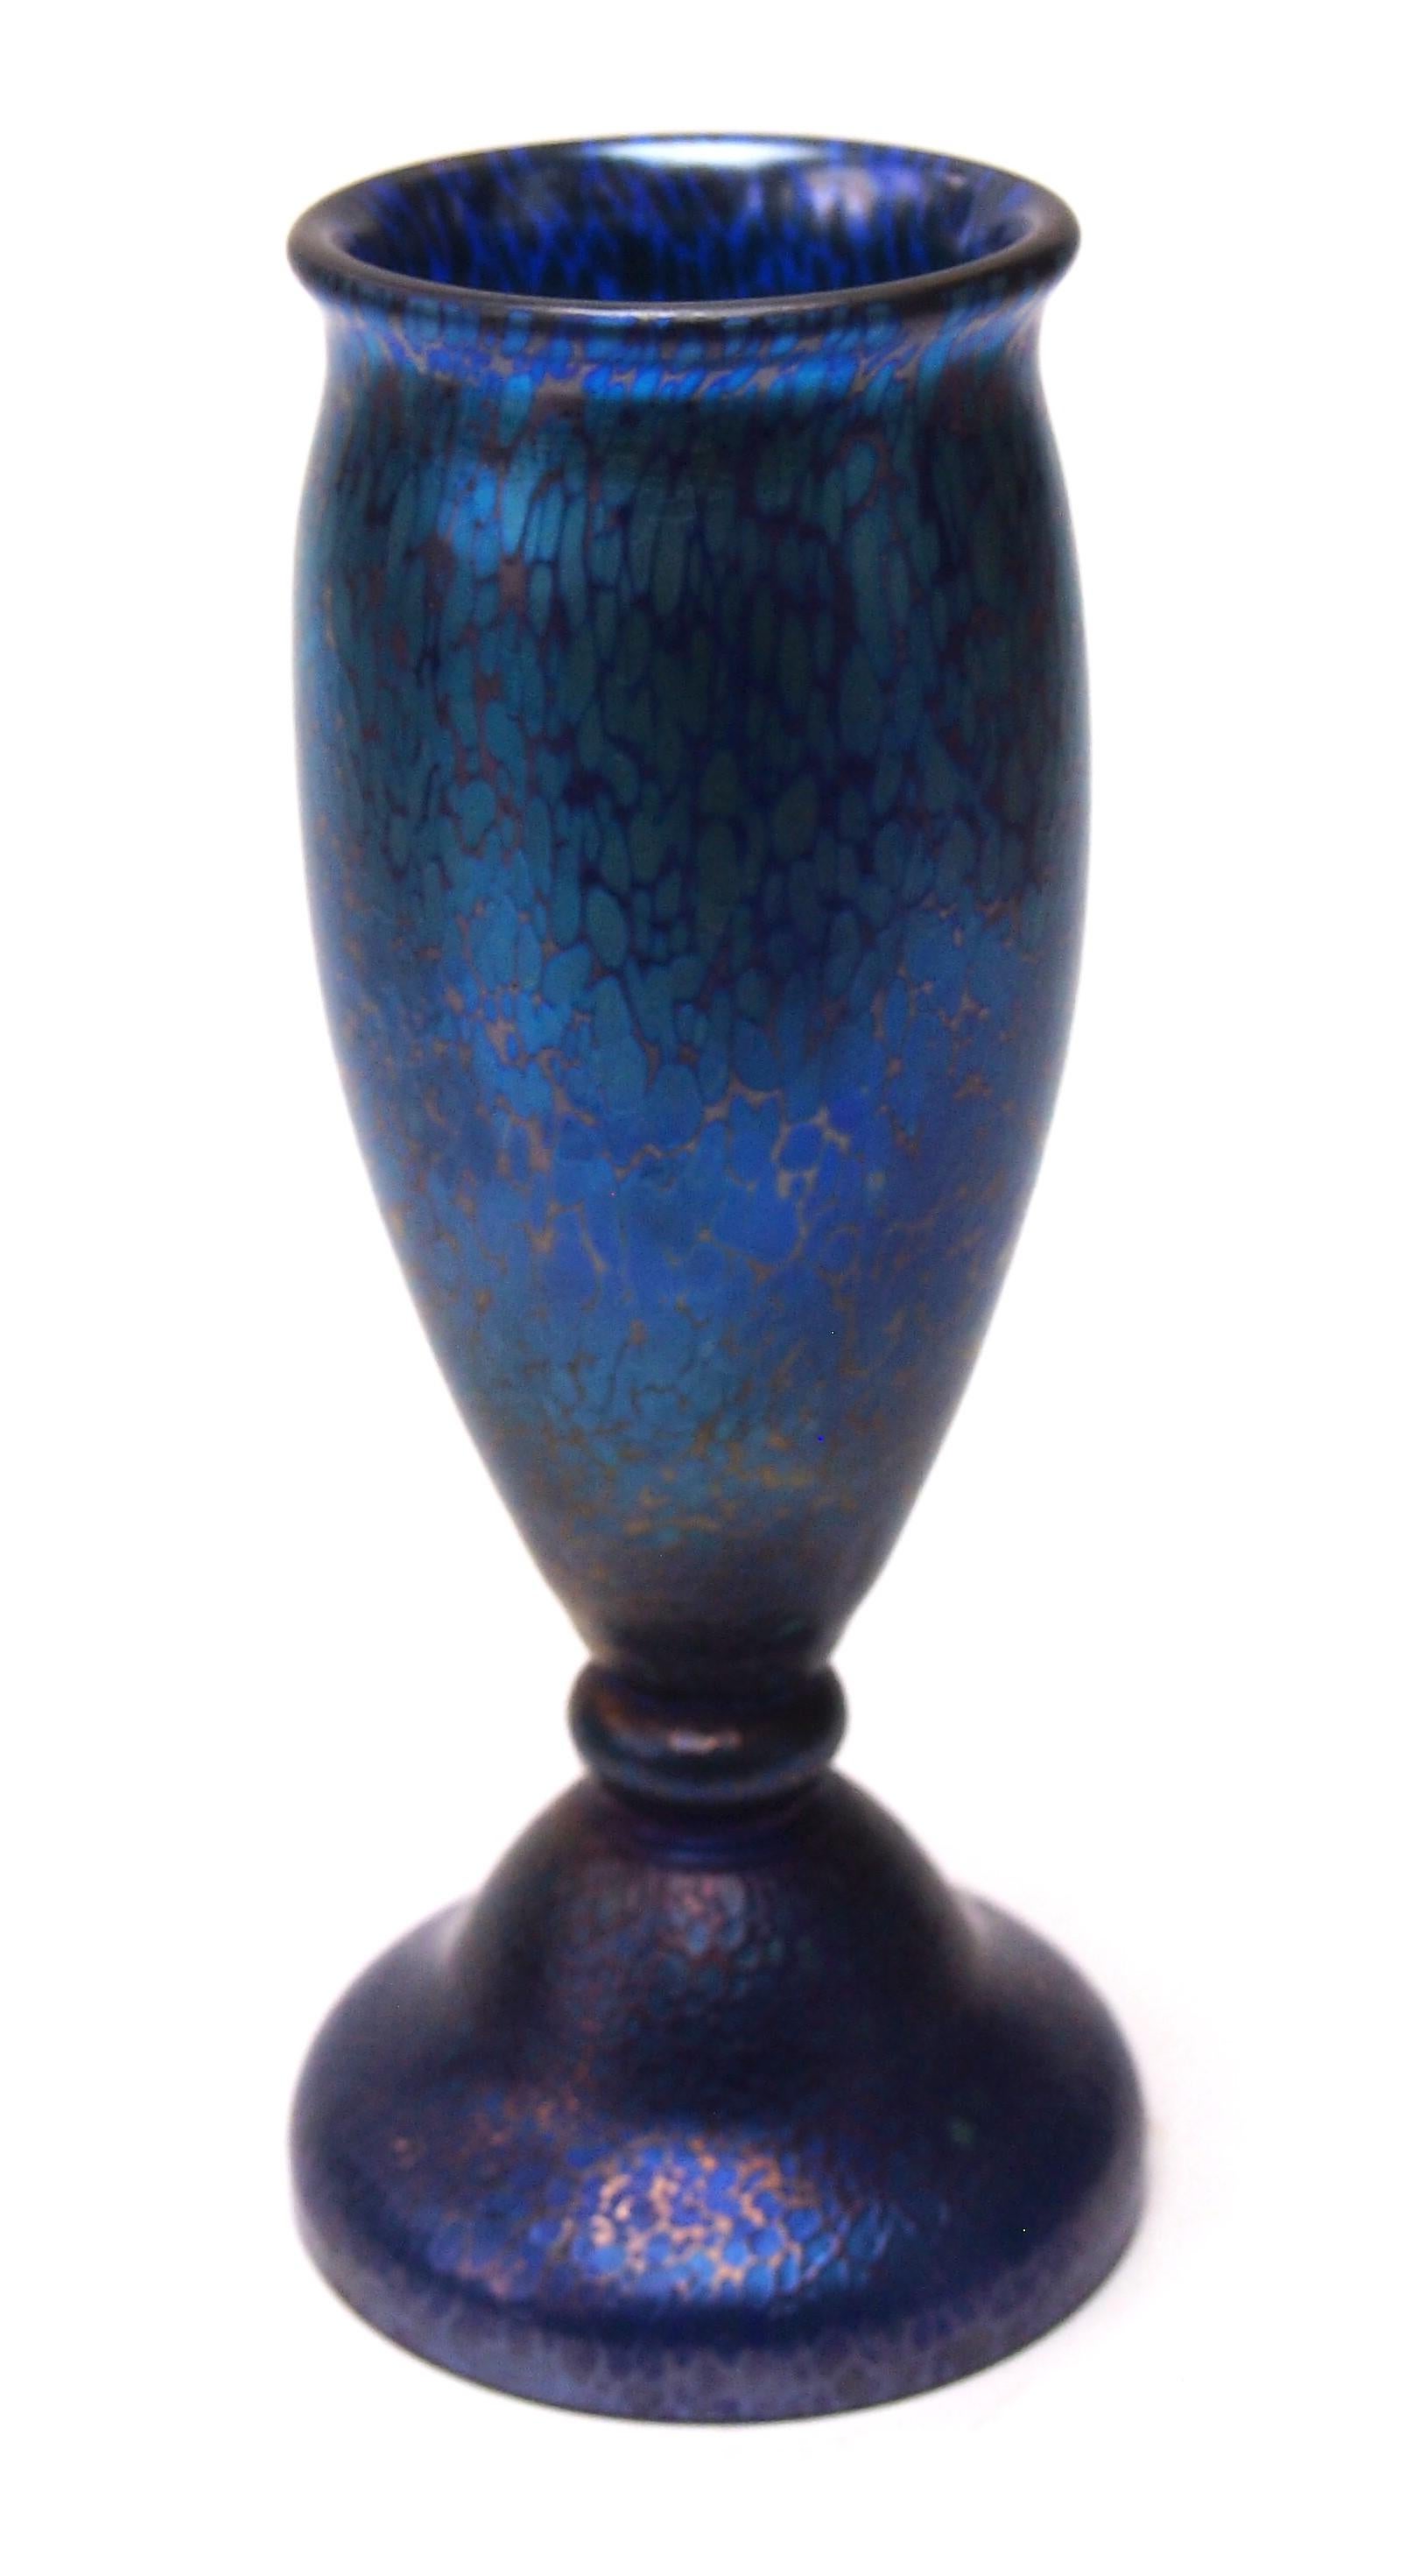 A fabulous Art Deco Cobalt (blue/gold on blue) Papillon (Butterfly wing) footed vase. This iridised finish was first created by Loetz in 1898, but the pattern was revised in the early 1920s when more complex shapes like this example were created